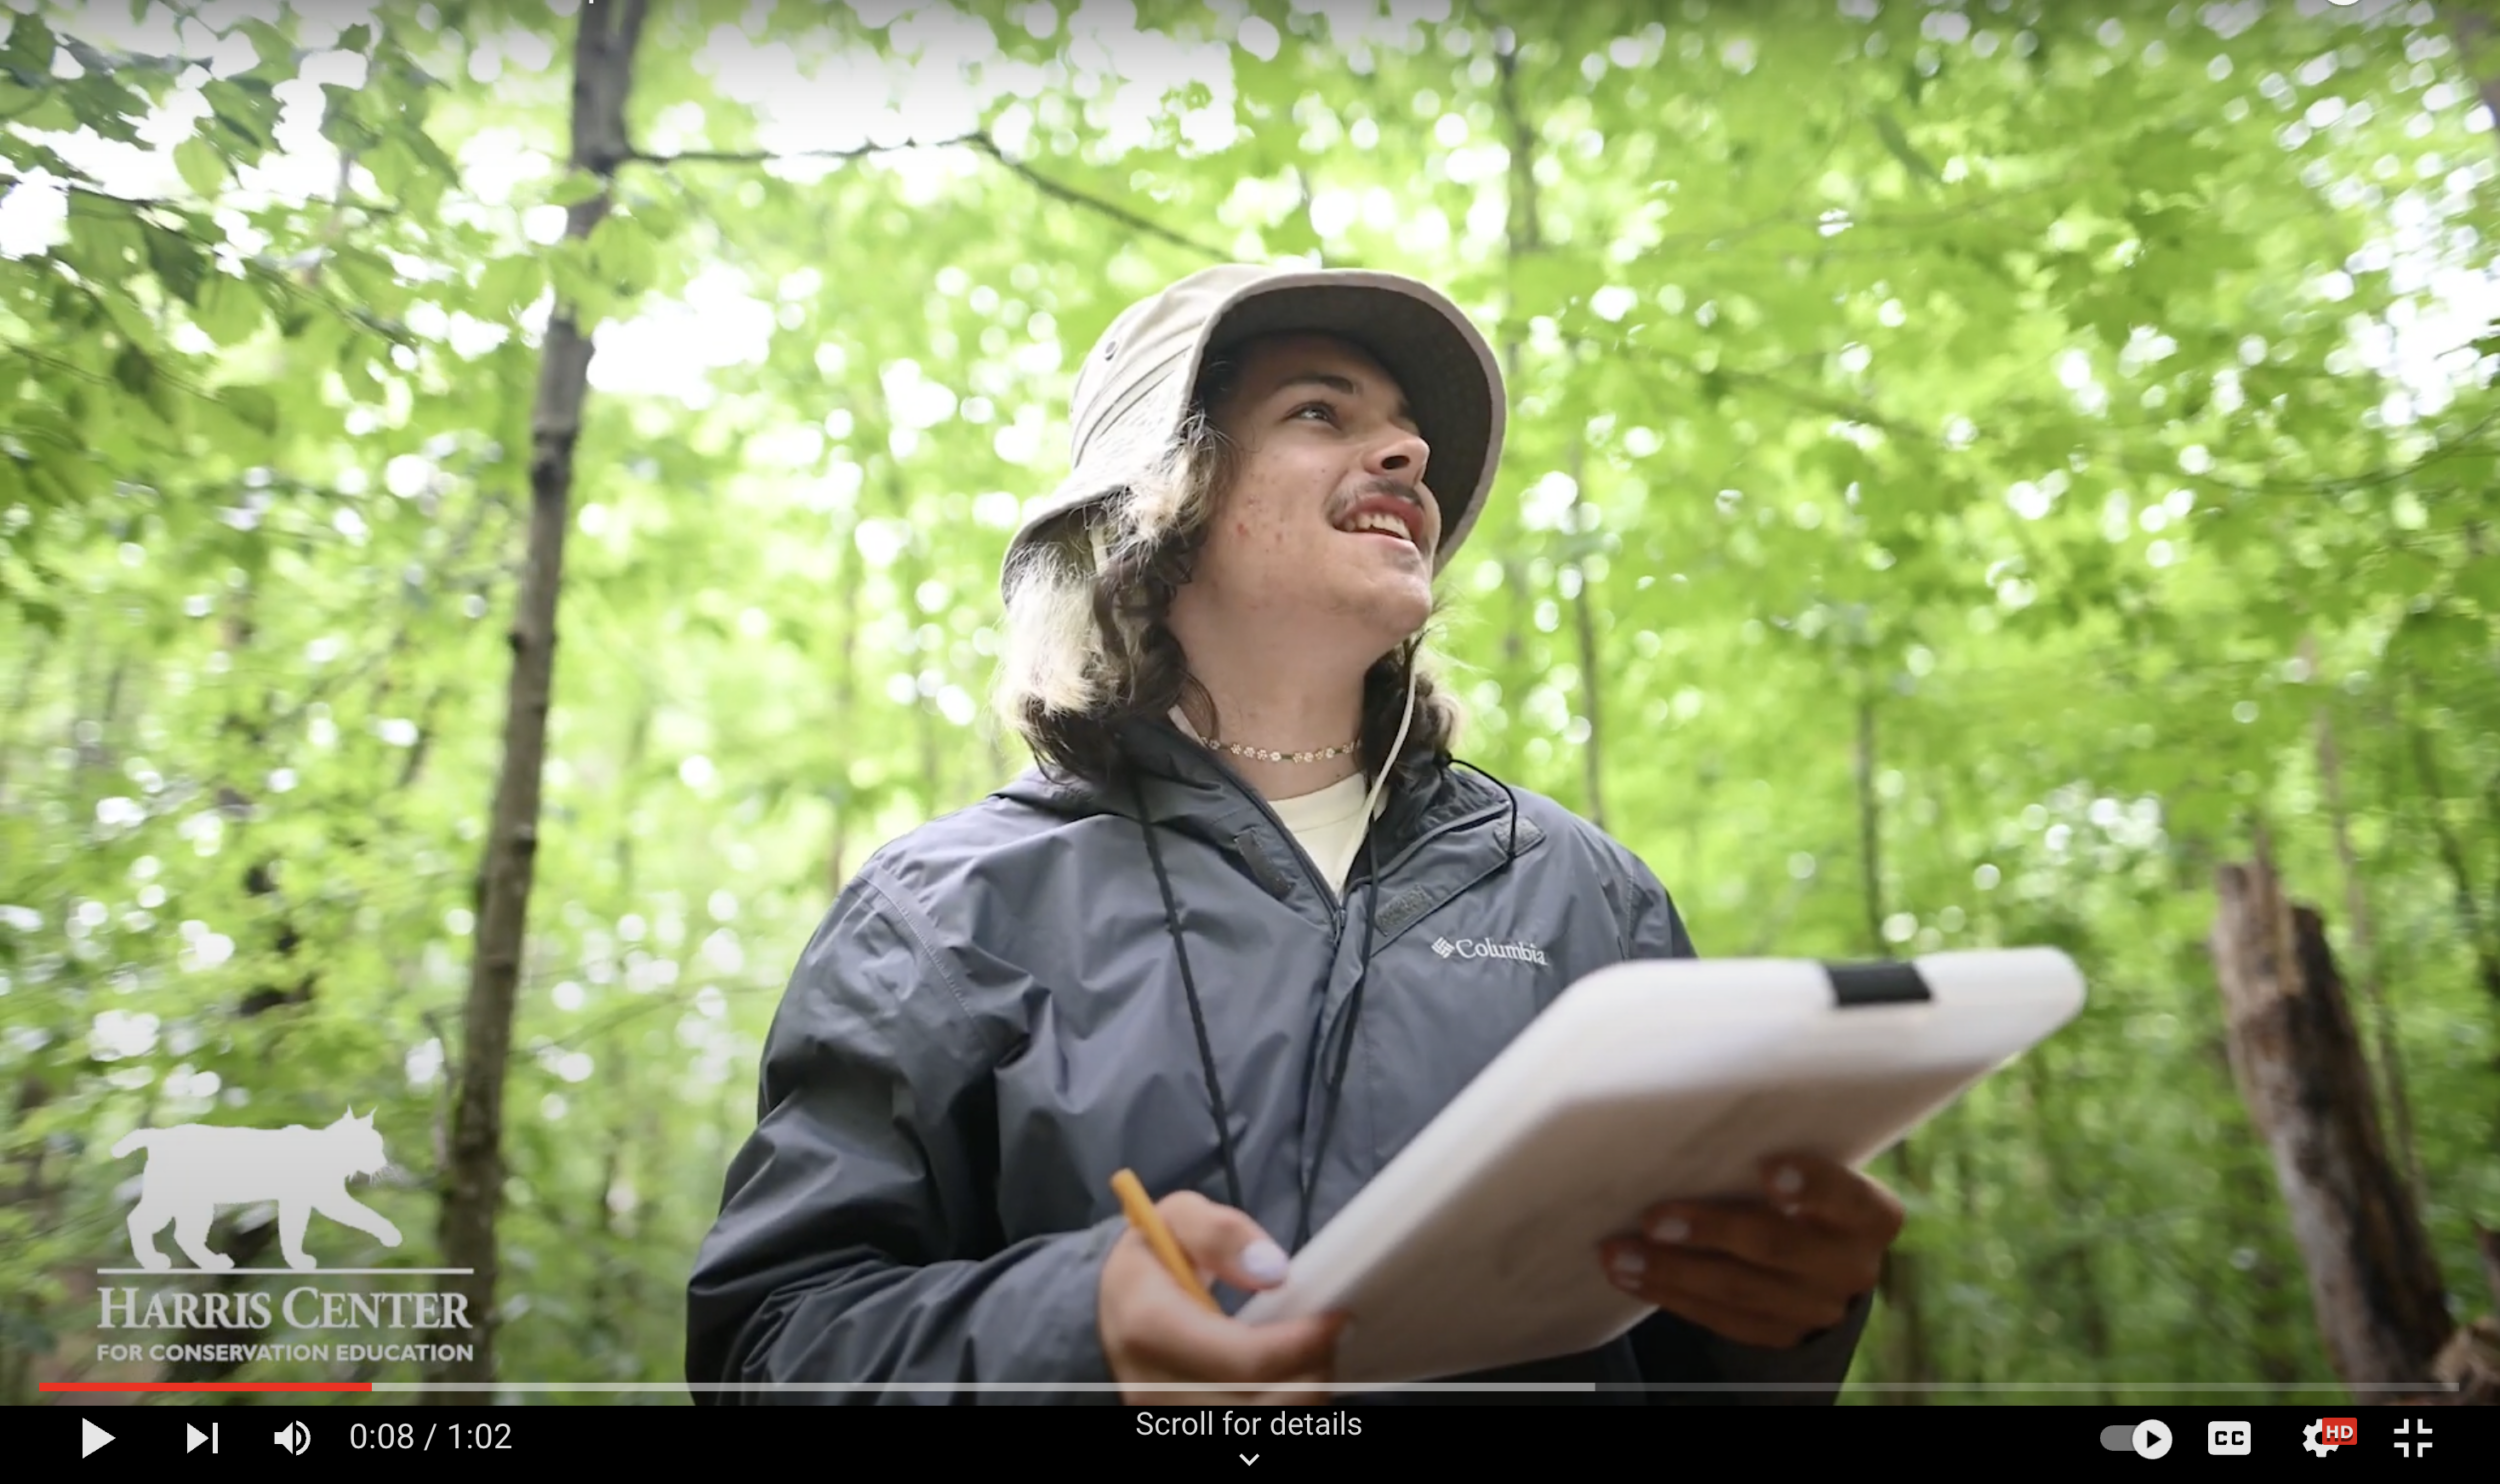 Screenshot from a YouTube video featuring intern Ryan Rotigliano in the forest, holding a clipboard.